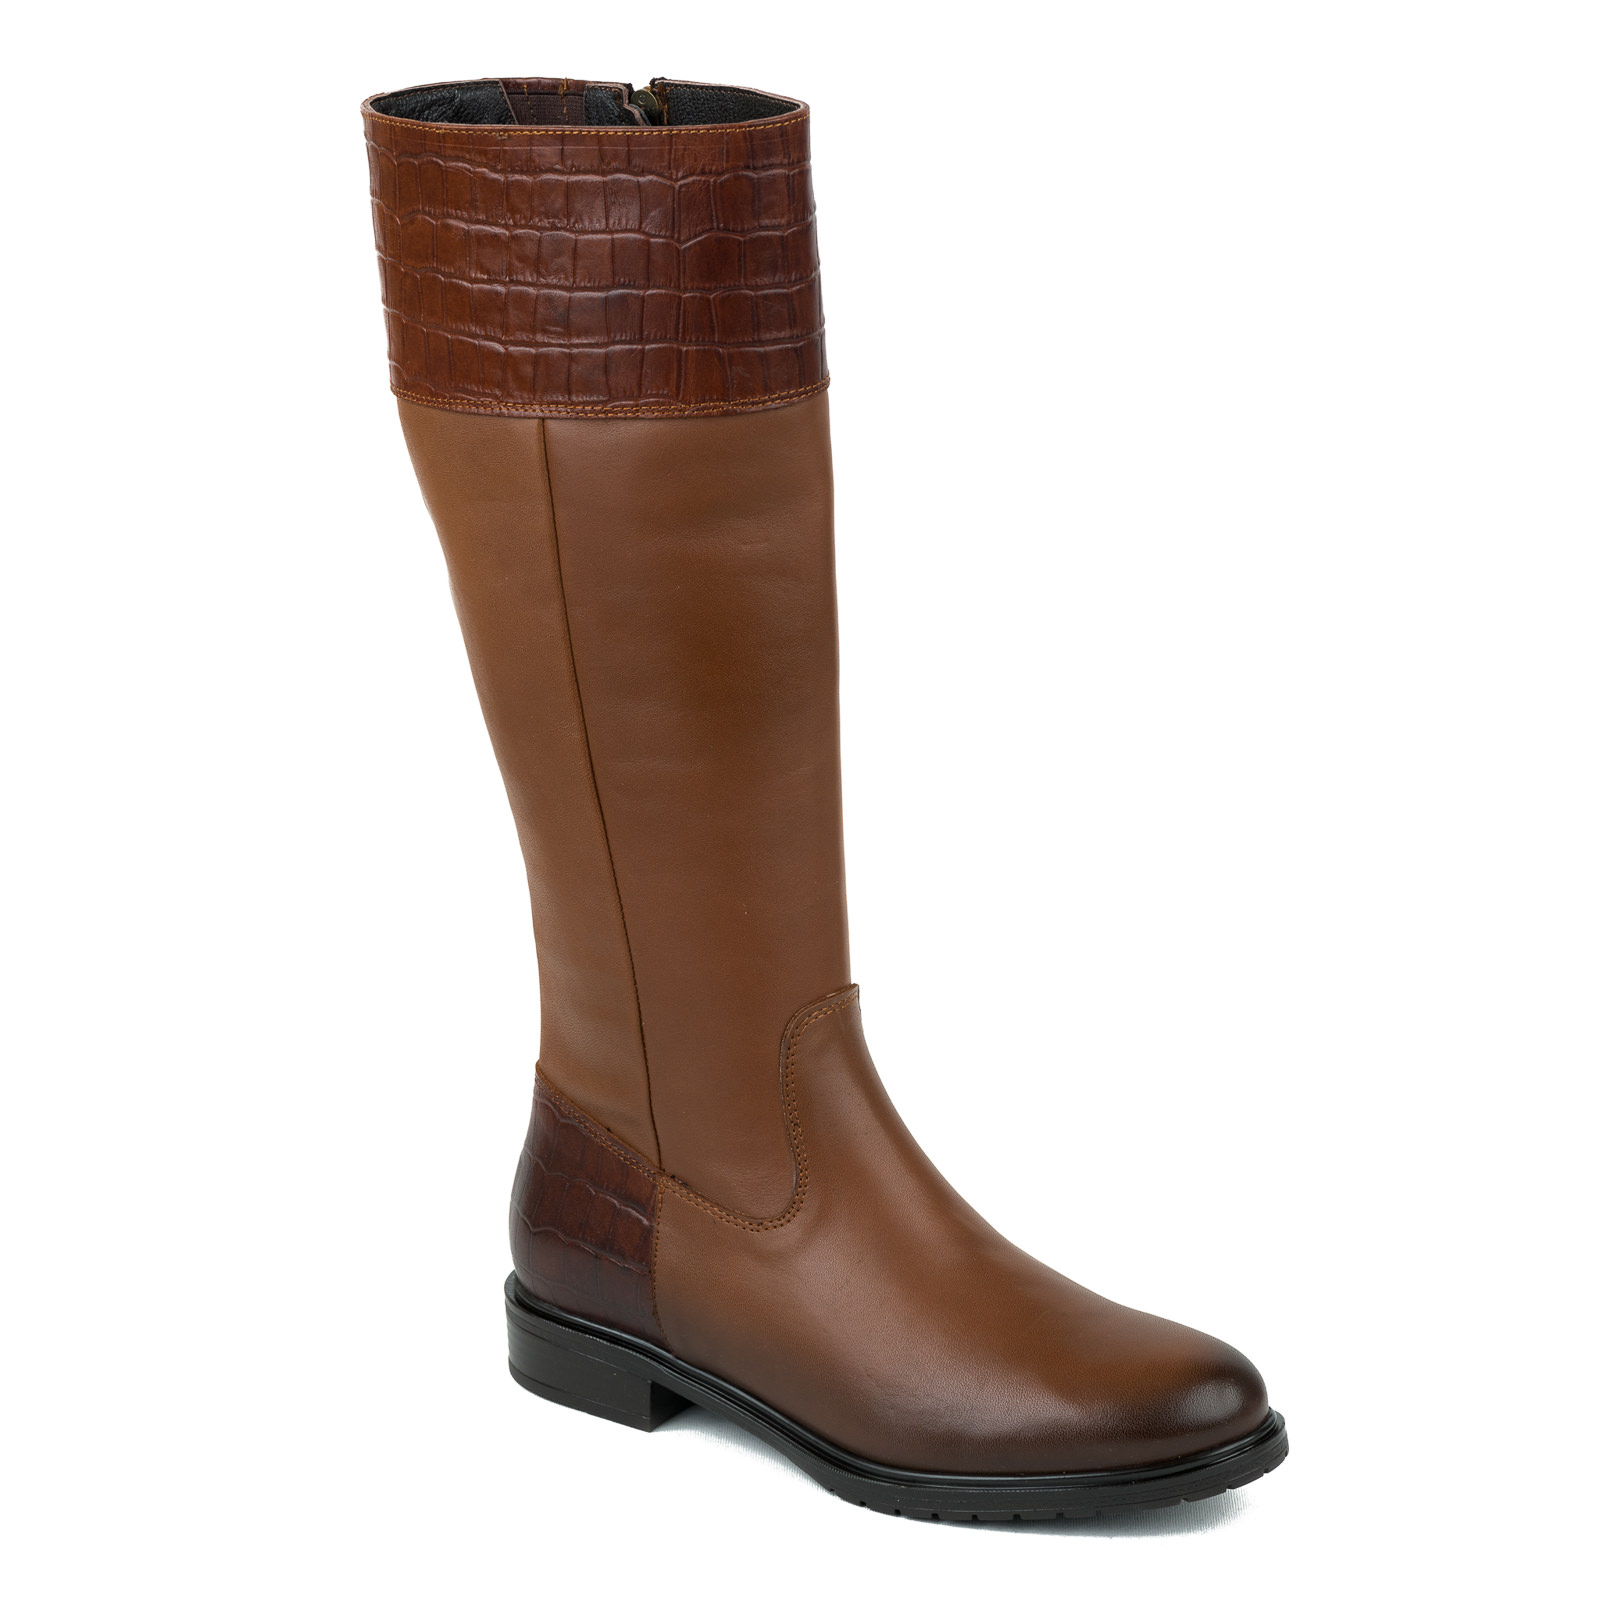 Leather boots B323 - CAMEL